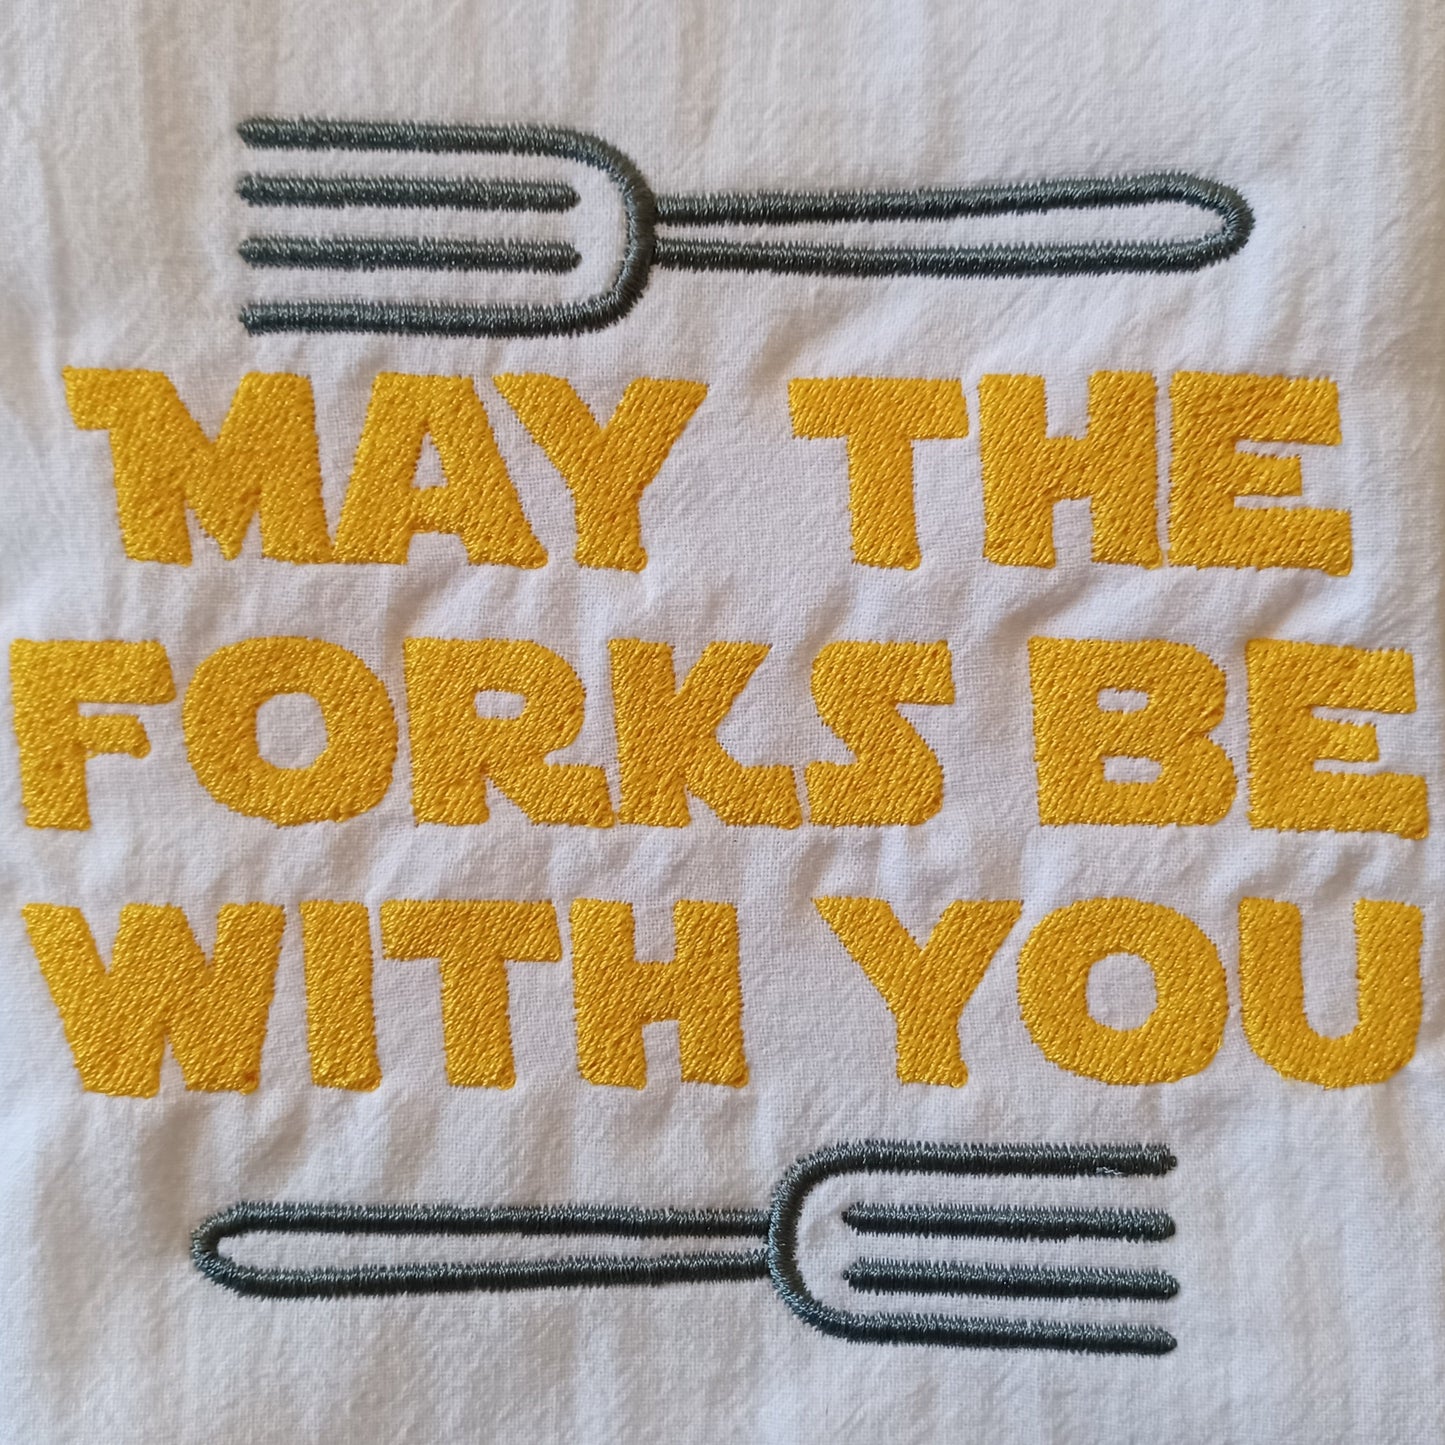 Space Pirates "May the Forks Be With You" (Embroidered CYO)